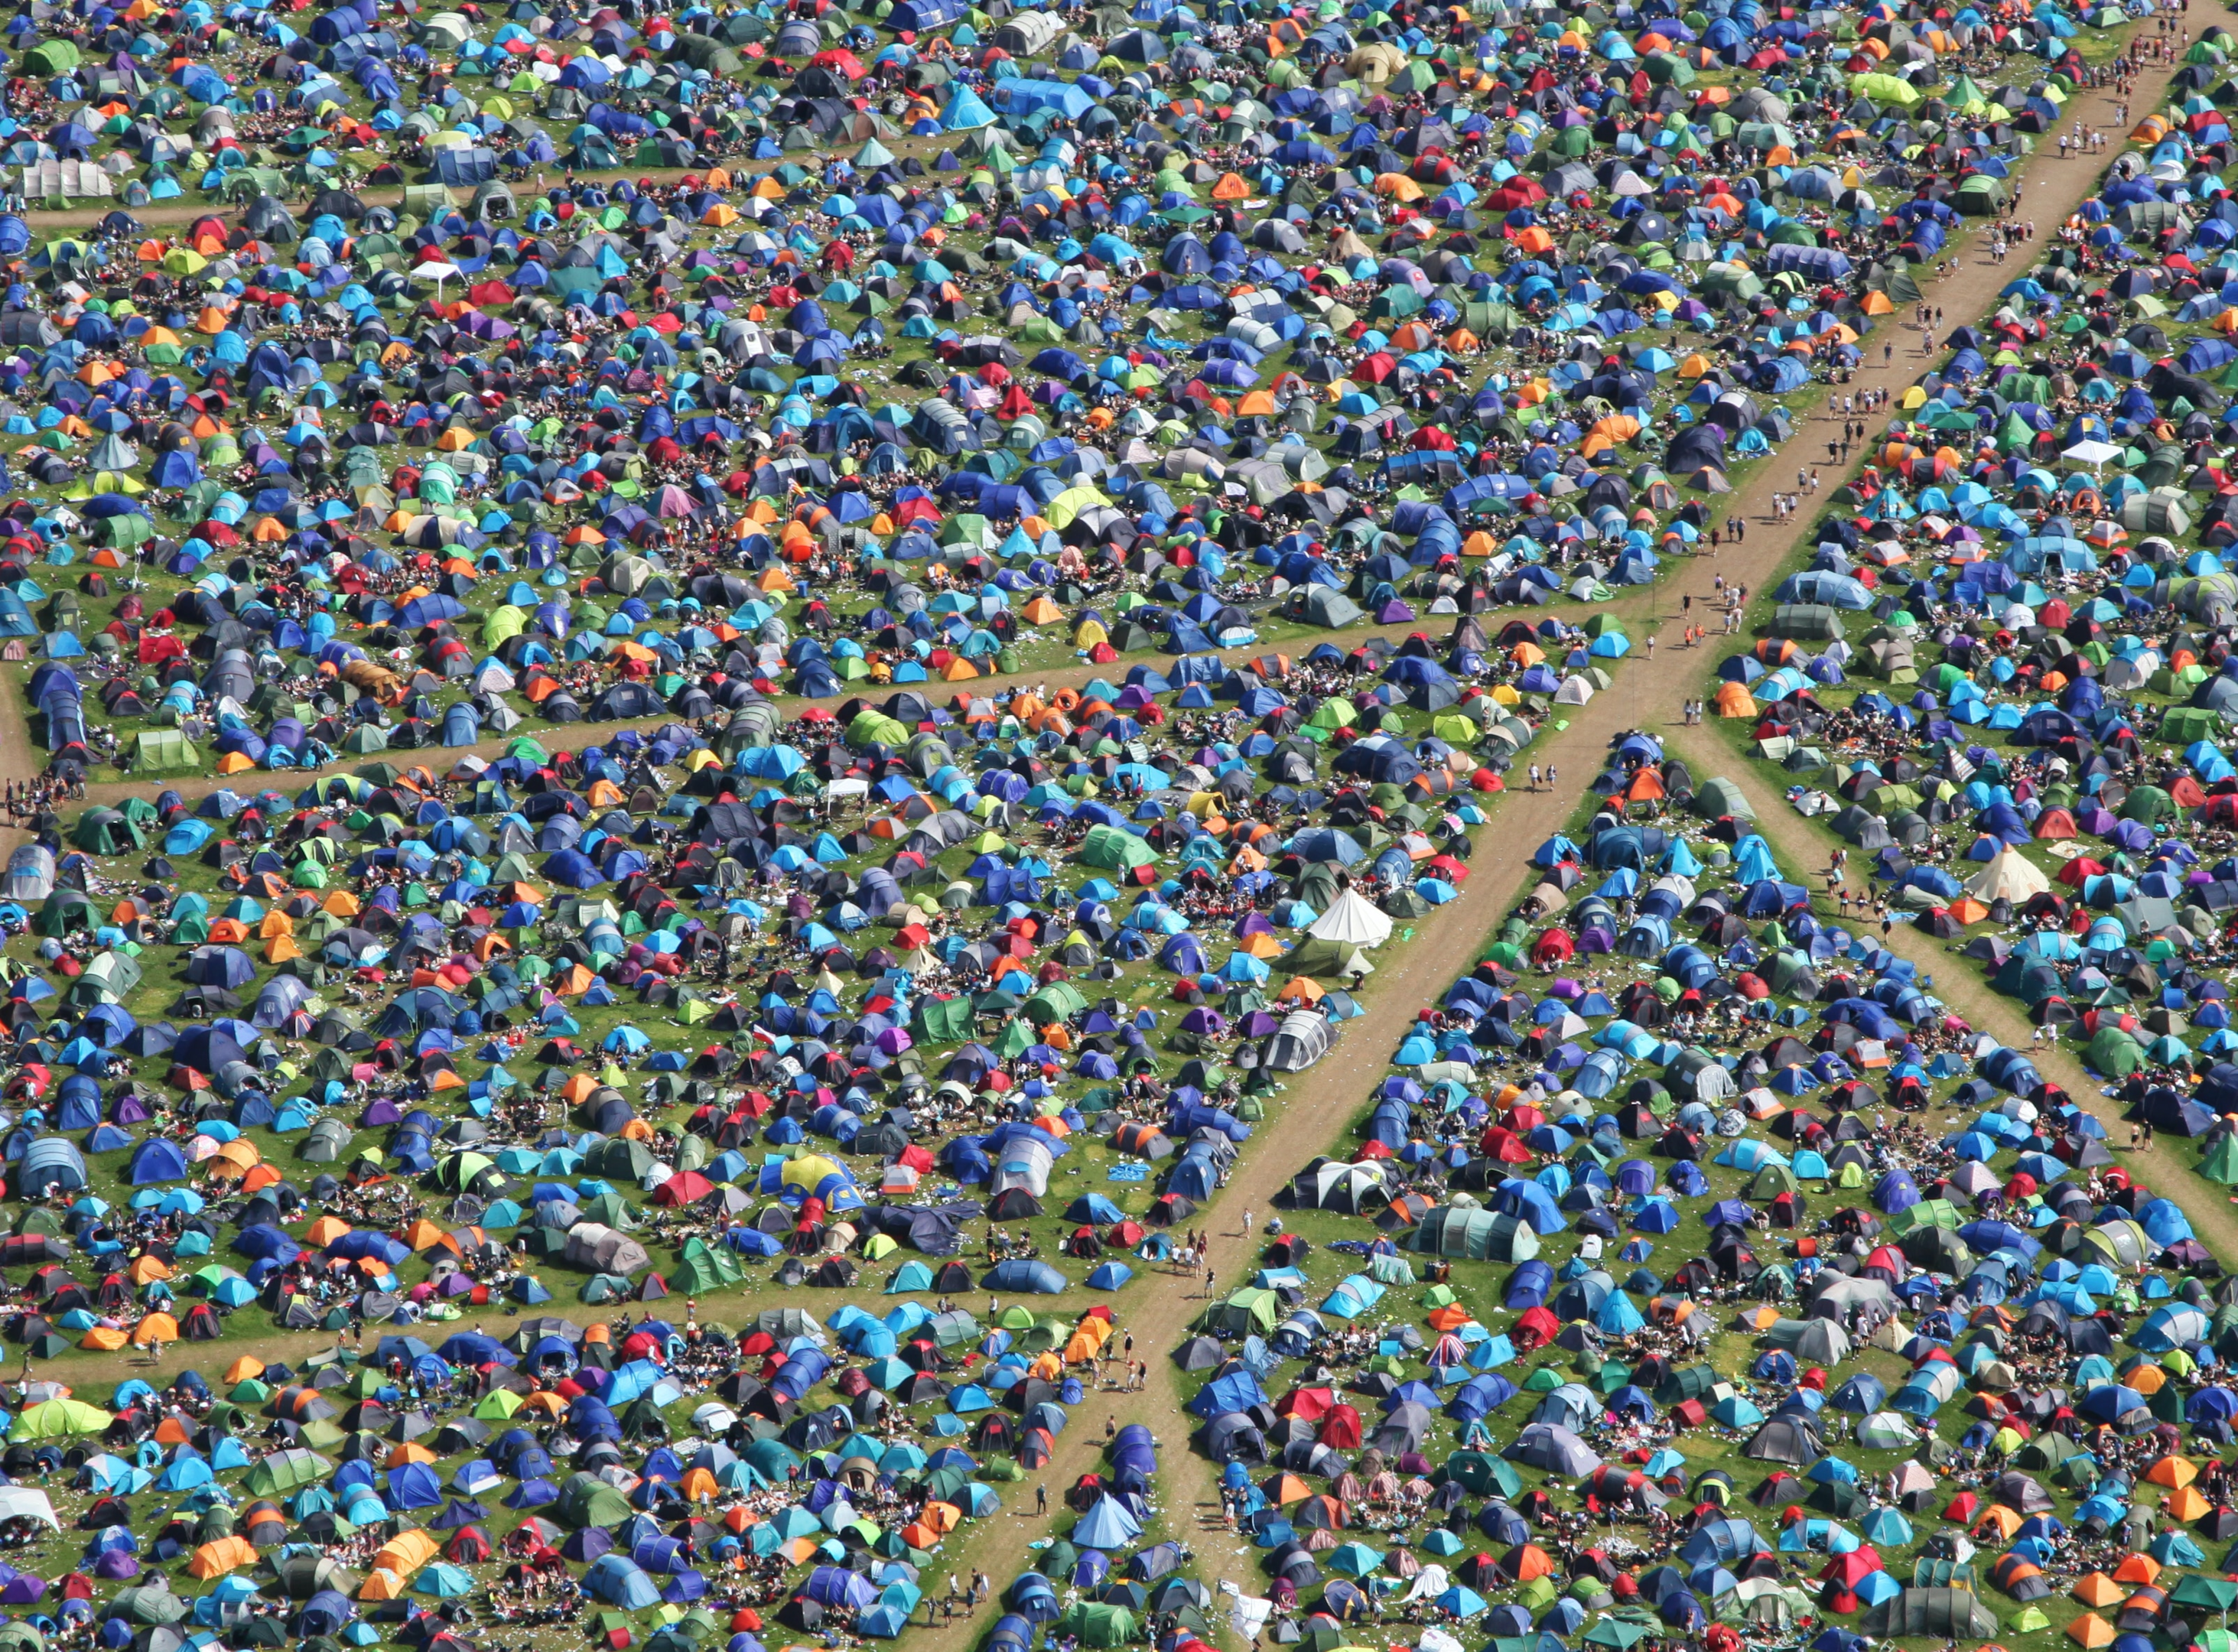 A field full of tents at a festival. Photo by Johnny Such on Unsplash